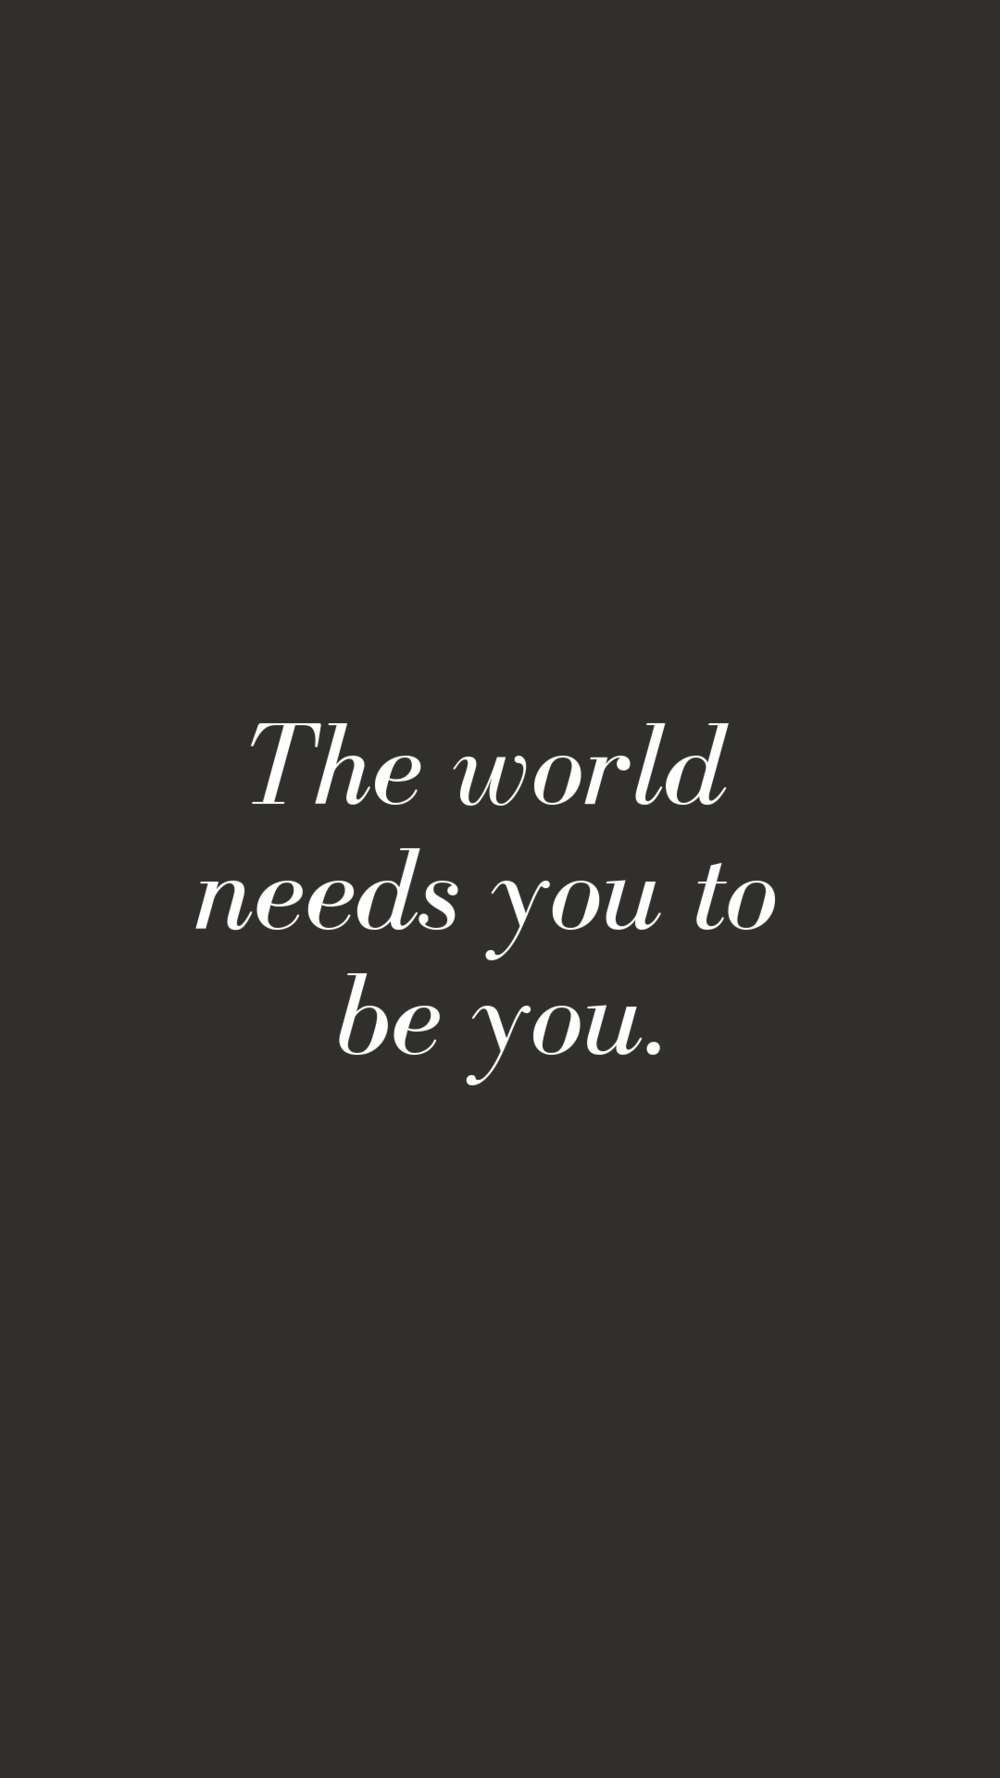 The world needs you to be you | Empowering Quotes for Your Phone Screen Background | Miranda Schroeder Blog | www.mirandaschroeder.com